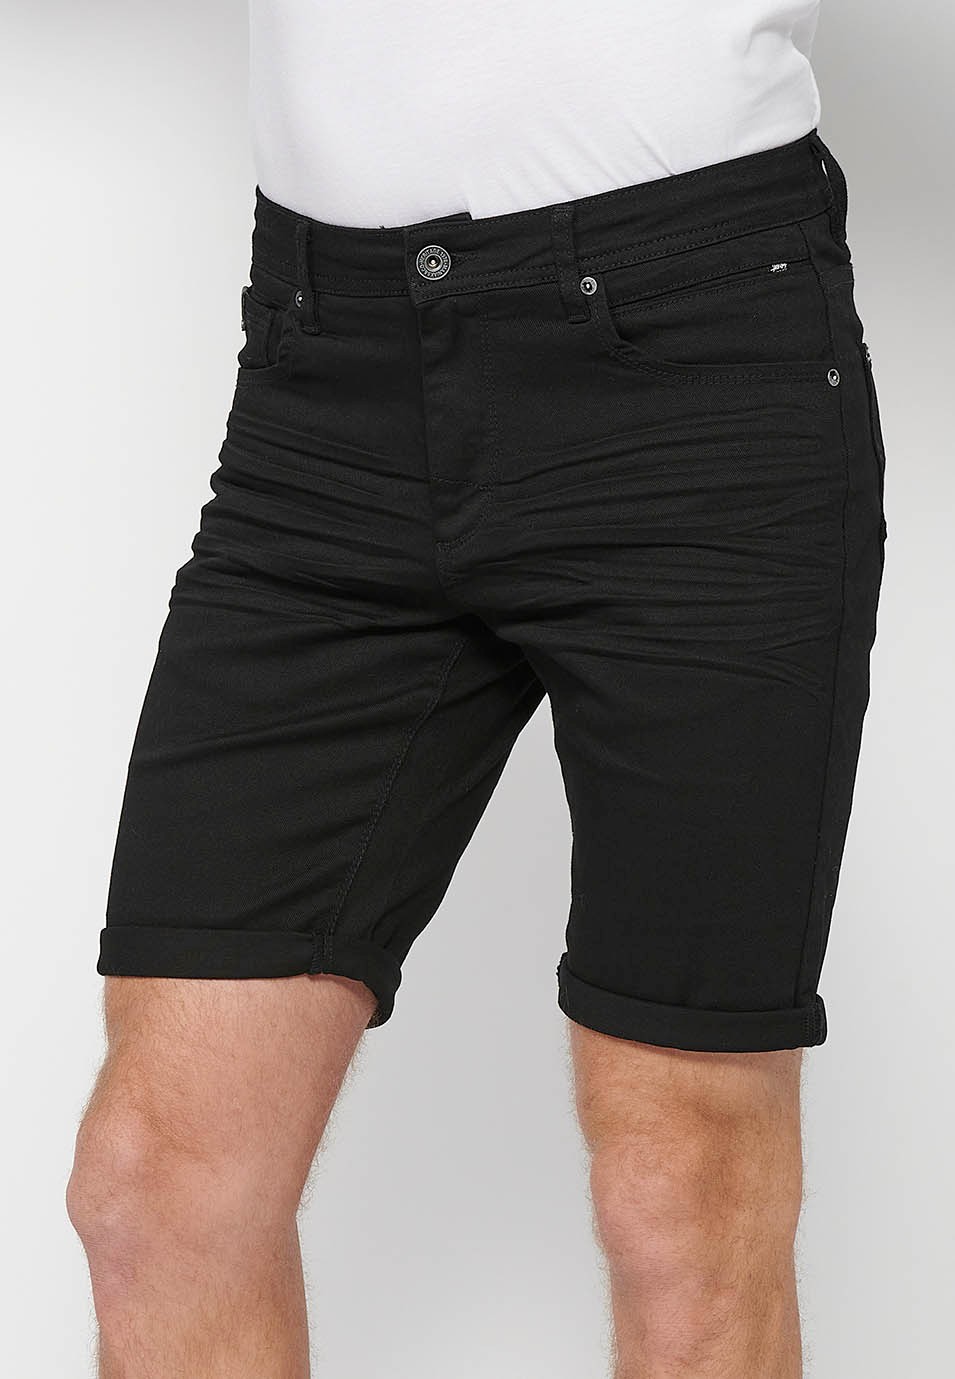 Denim Bermuda shorts with cuffed finish and front zipper and button closure. Five pockets, one black color pocket for men 2